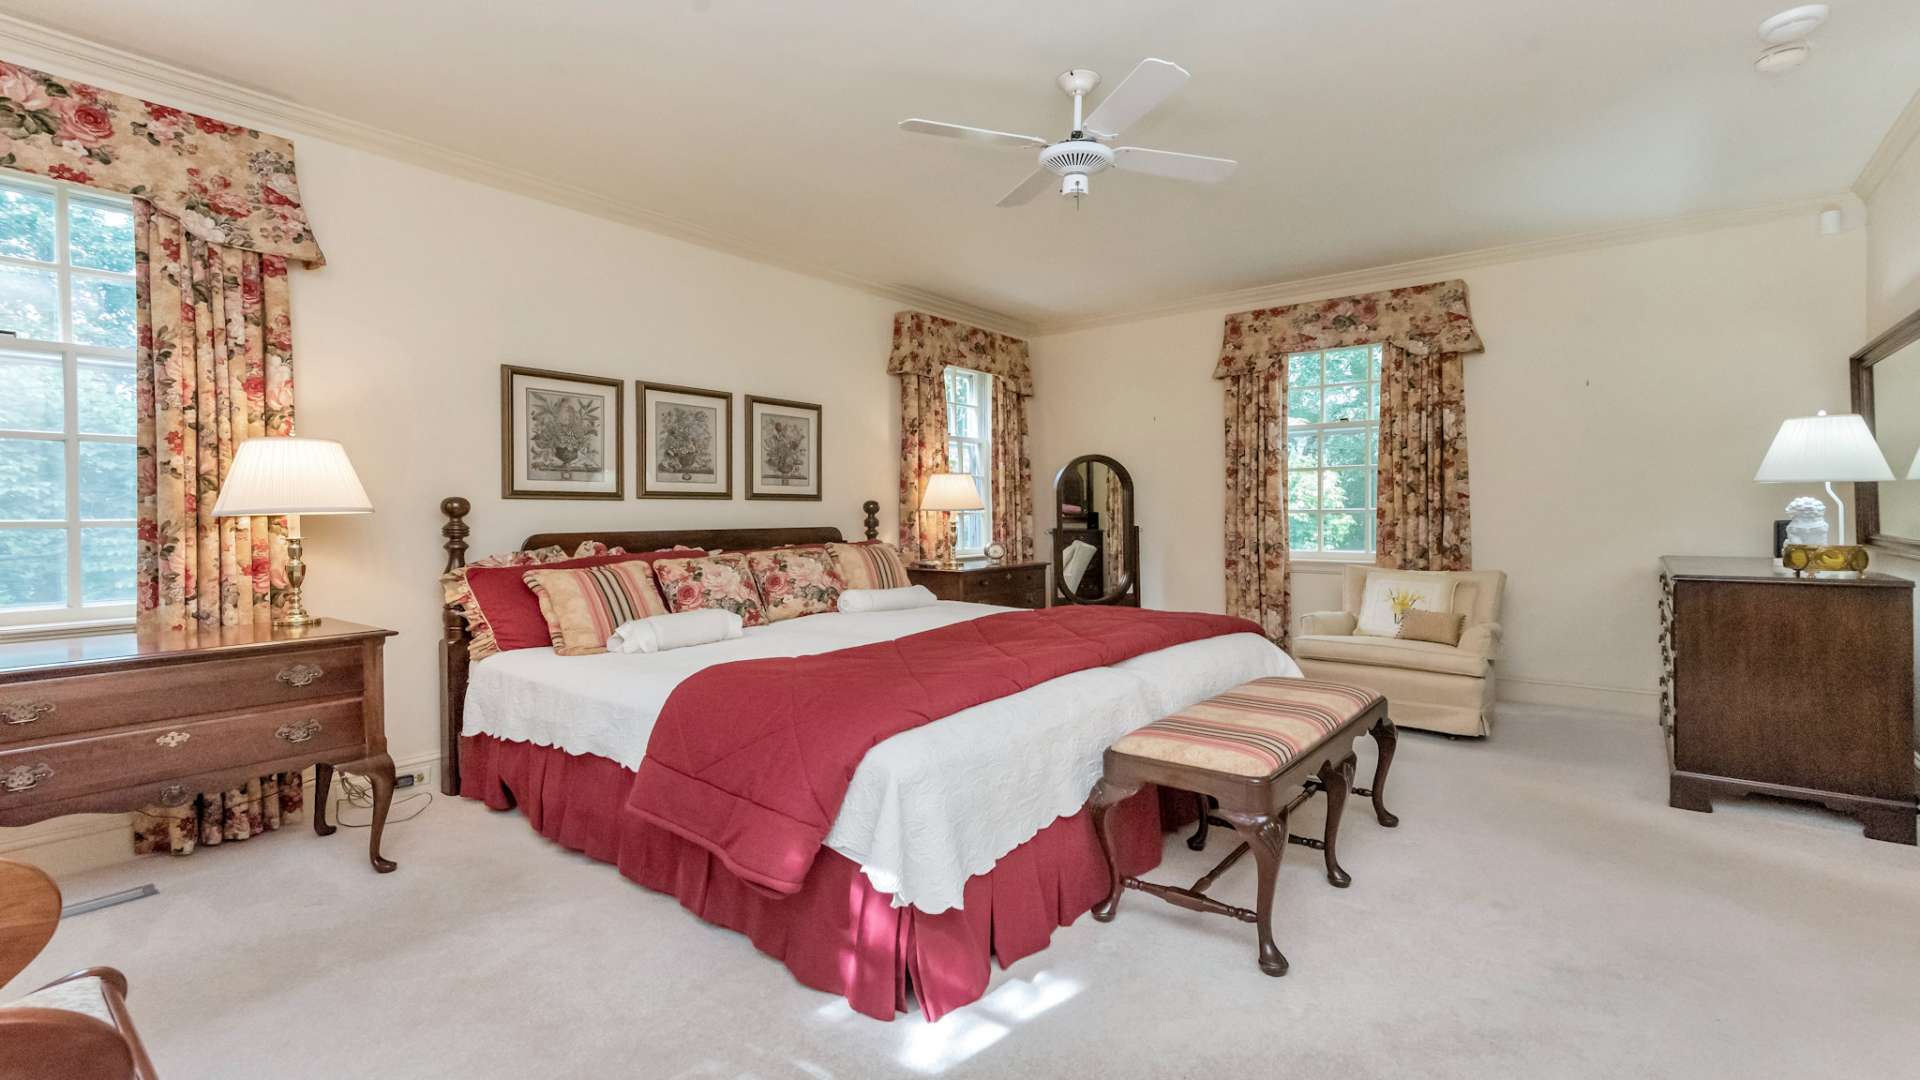 The primary master suite is conveniently located on the main level and offers a relaxing retreat at the end of the day. The private ensuite bath includes separate walk-in closets, a soaking tub, and a separate shower.